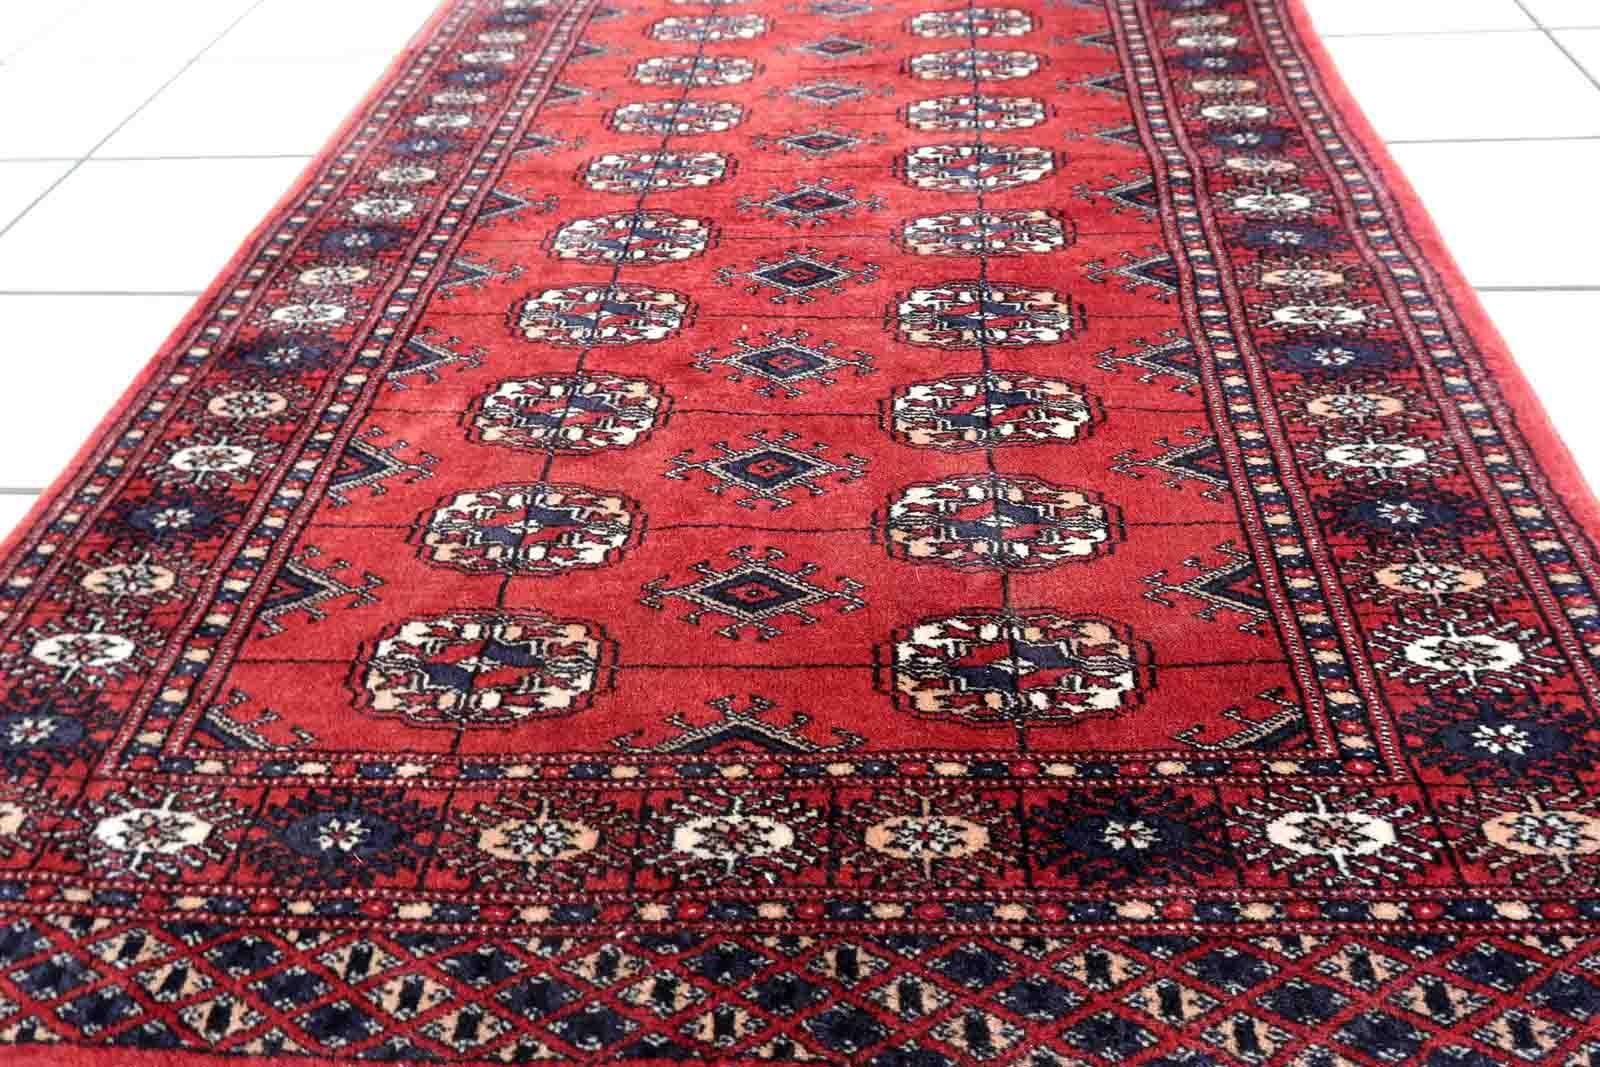 Handmade vintage red rug in Bukhara design. The rug is in original good condition, from the end of 20th century.

-condition: original good,

-circa: 1970s,

-size: 2.6' x 3.9' (81cm x 119cm),

-material: wool,

-country of origin: